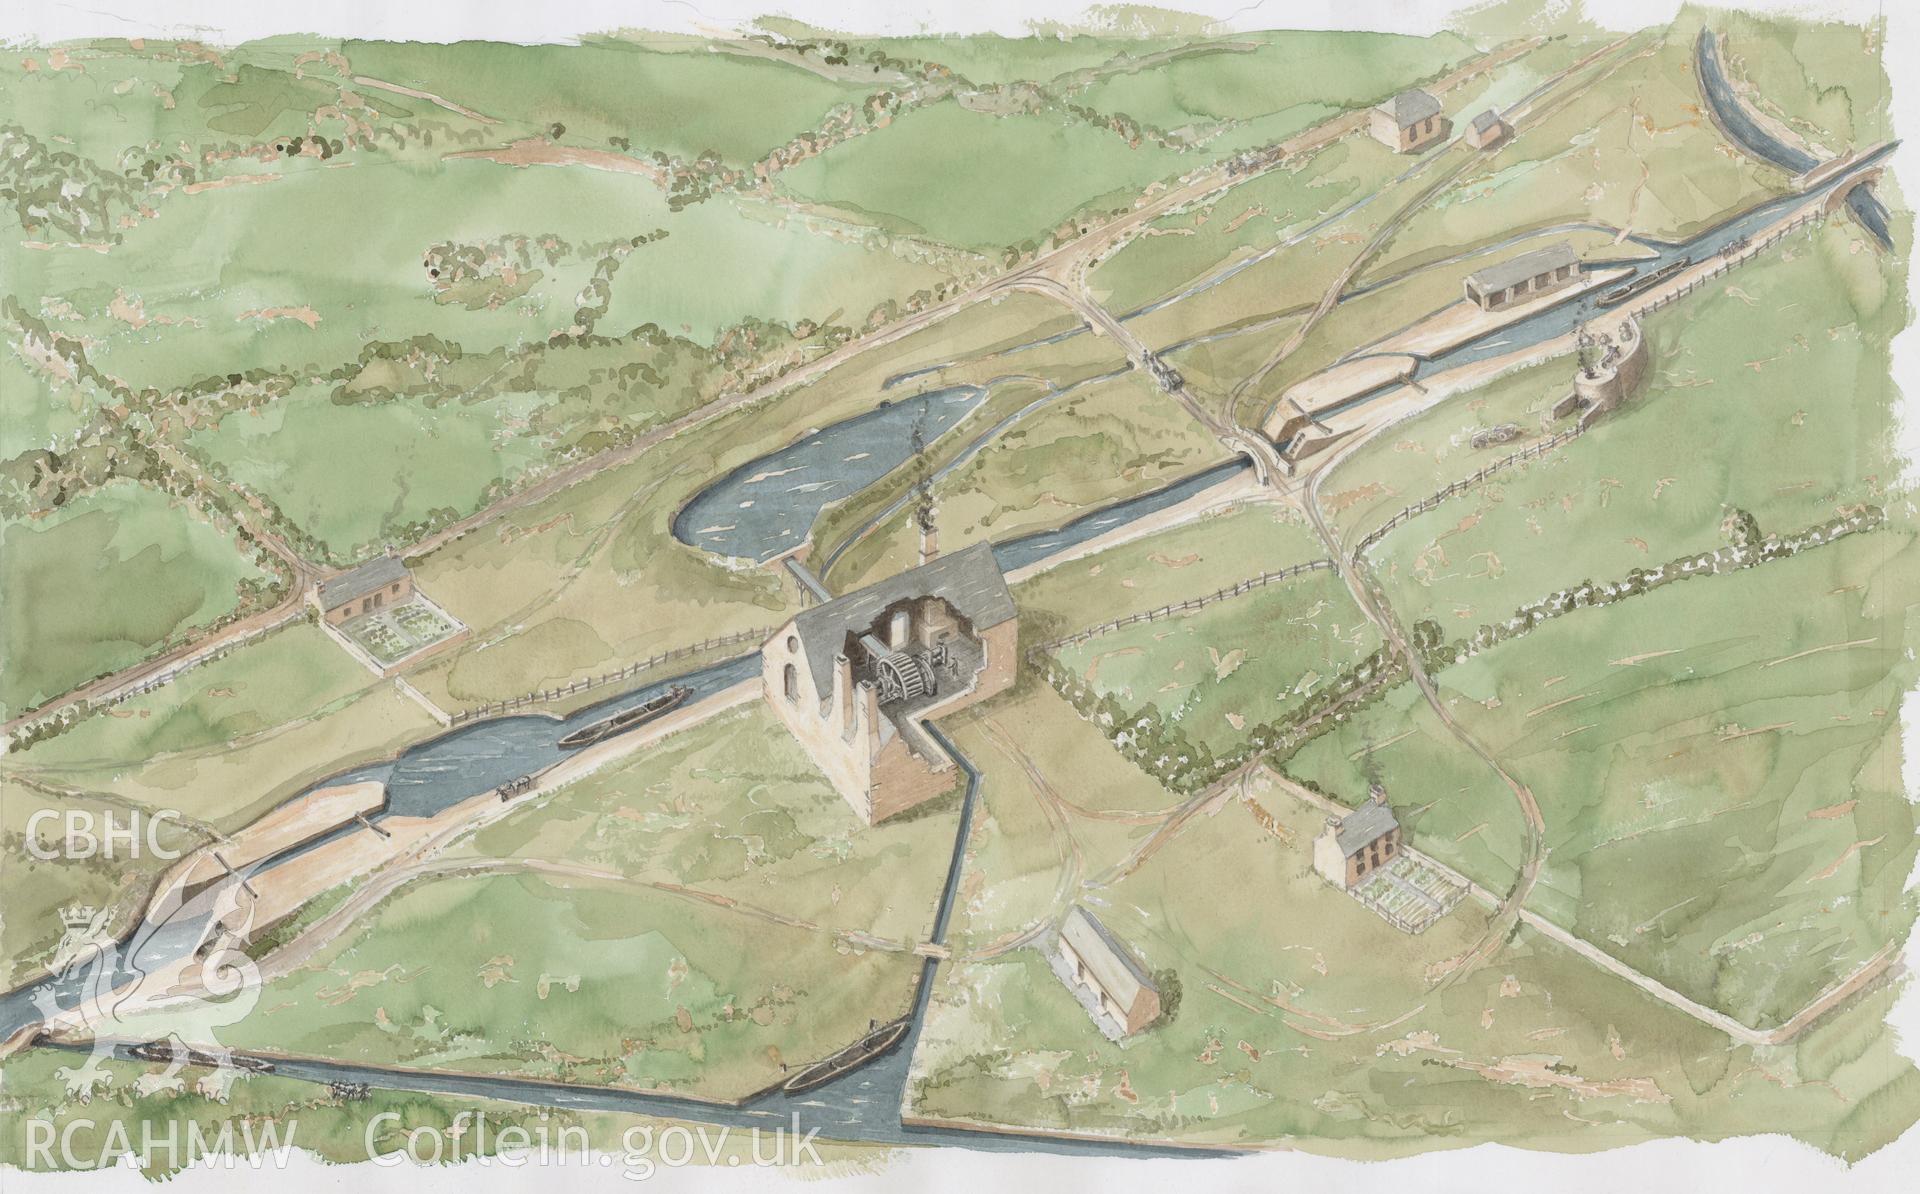 Watercolour by Geoff Ward comprising a reconstruction view of Pontardawe Tinplate Works as it would have appeared in the mid-nineteenth-century.